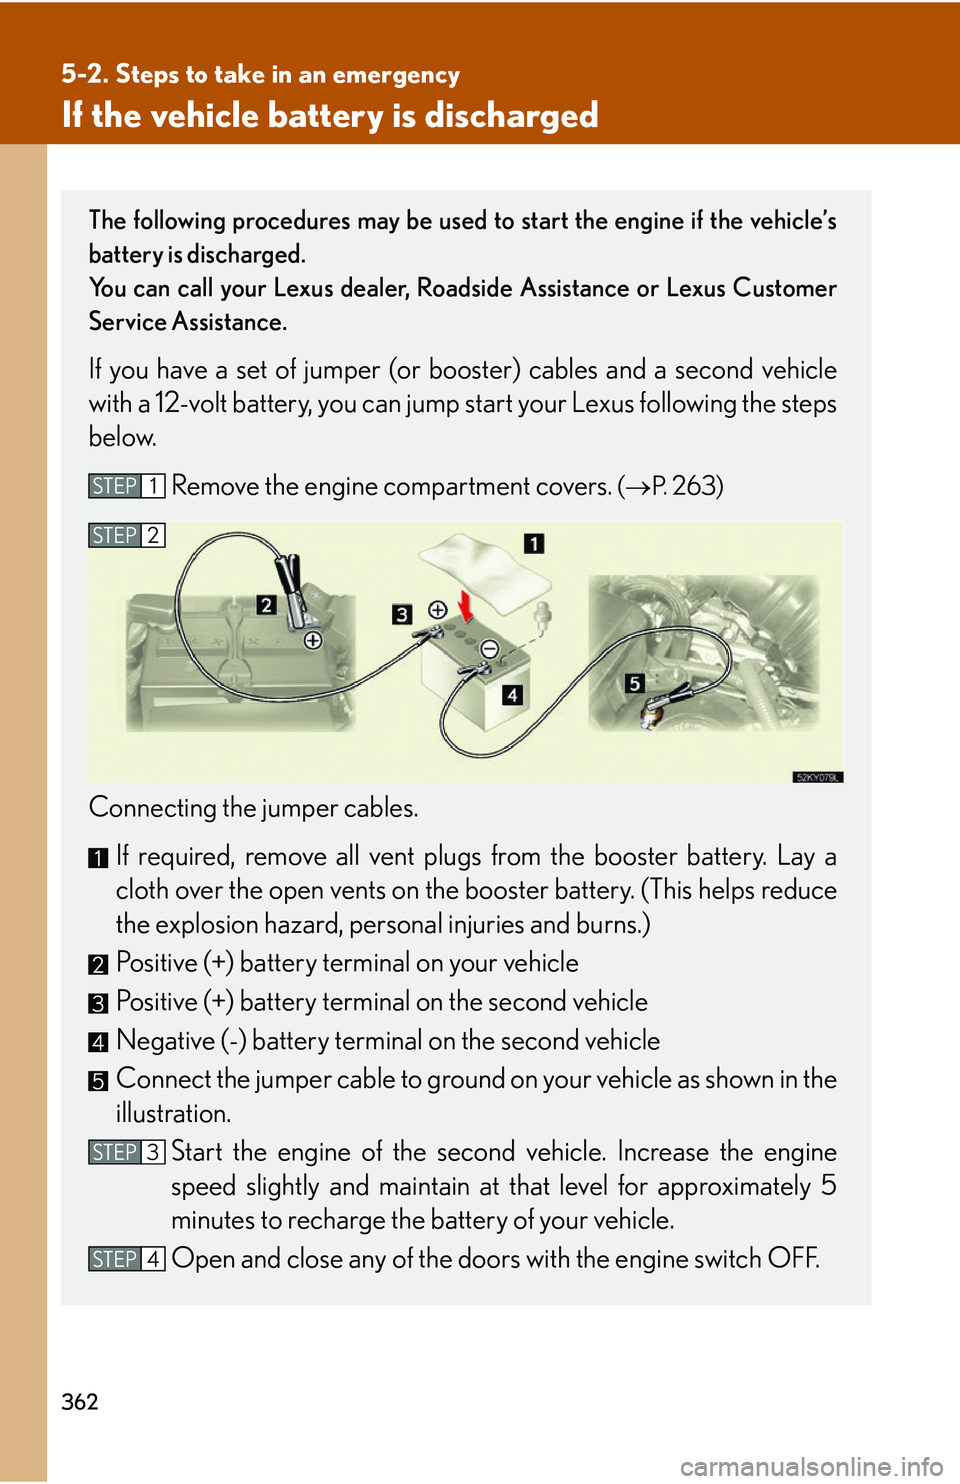 Lexus IS250 2006  Do-it-yourself maintenance / LEXUS 2006 IS350/250 THROUGH APRIL 2006 PROD. OWNERS MANUAL (OM53508U) 362
5-2. Steps to take in an emergency
If the vehicle battery is discharged
The following procedures may be used to start the engine if the vehicle’s
battery is discharged.
You can call your Lexus d